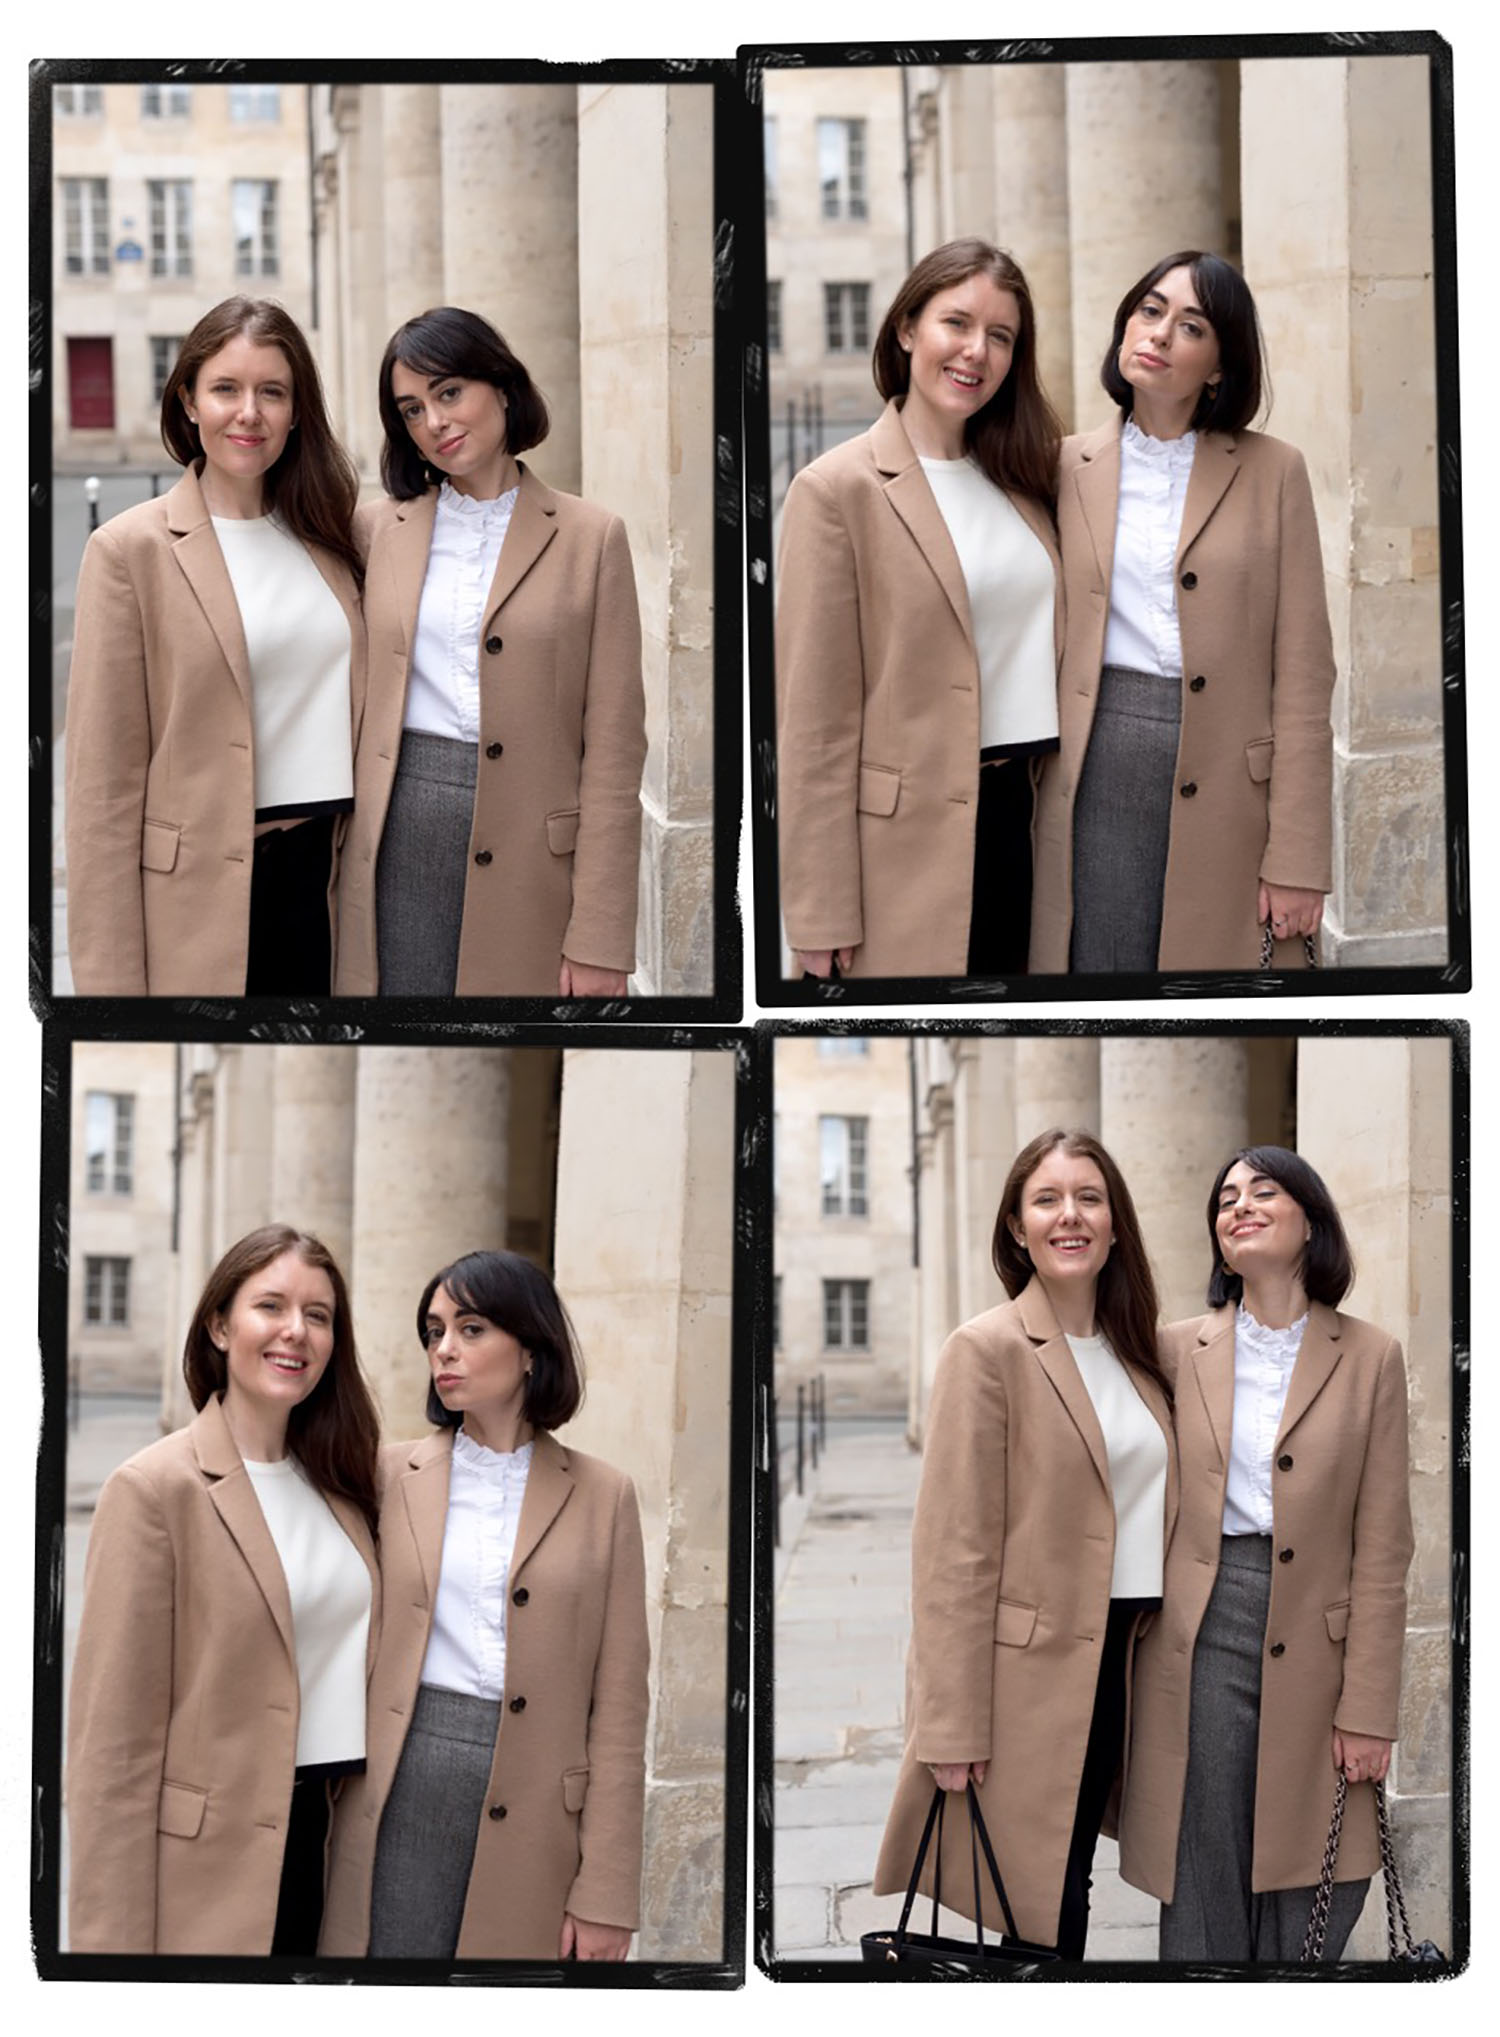 Top Canadian fashion bloggers Cee Fardoe of Coco & Vera and Lyndi Barrett of Style Calling at the Palais-Royal during Paris Fashion Week, wearing Uniqlo camel coats